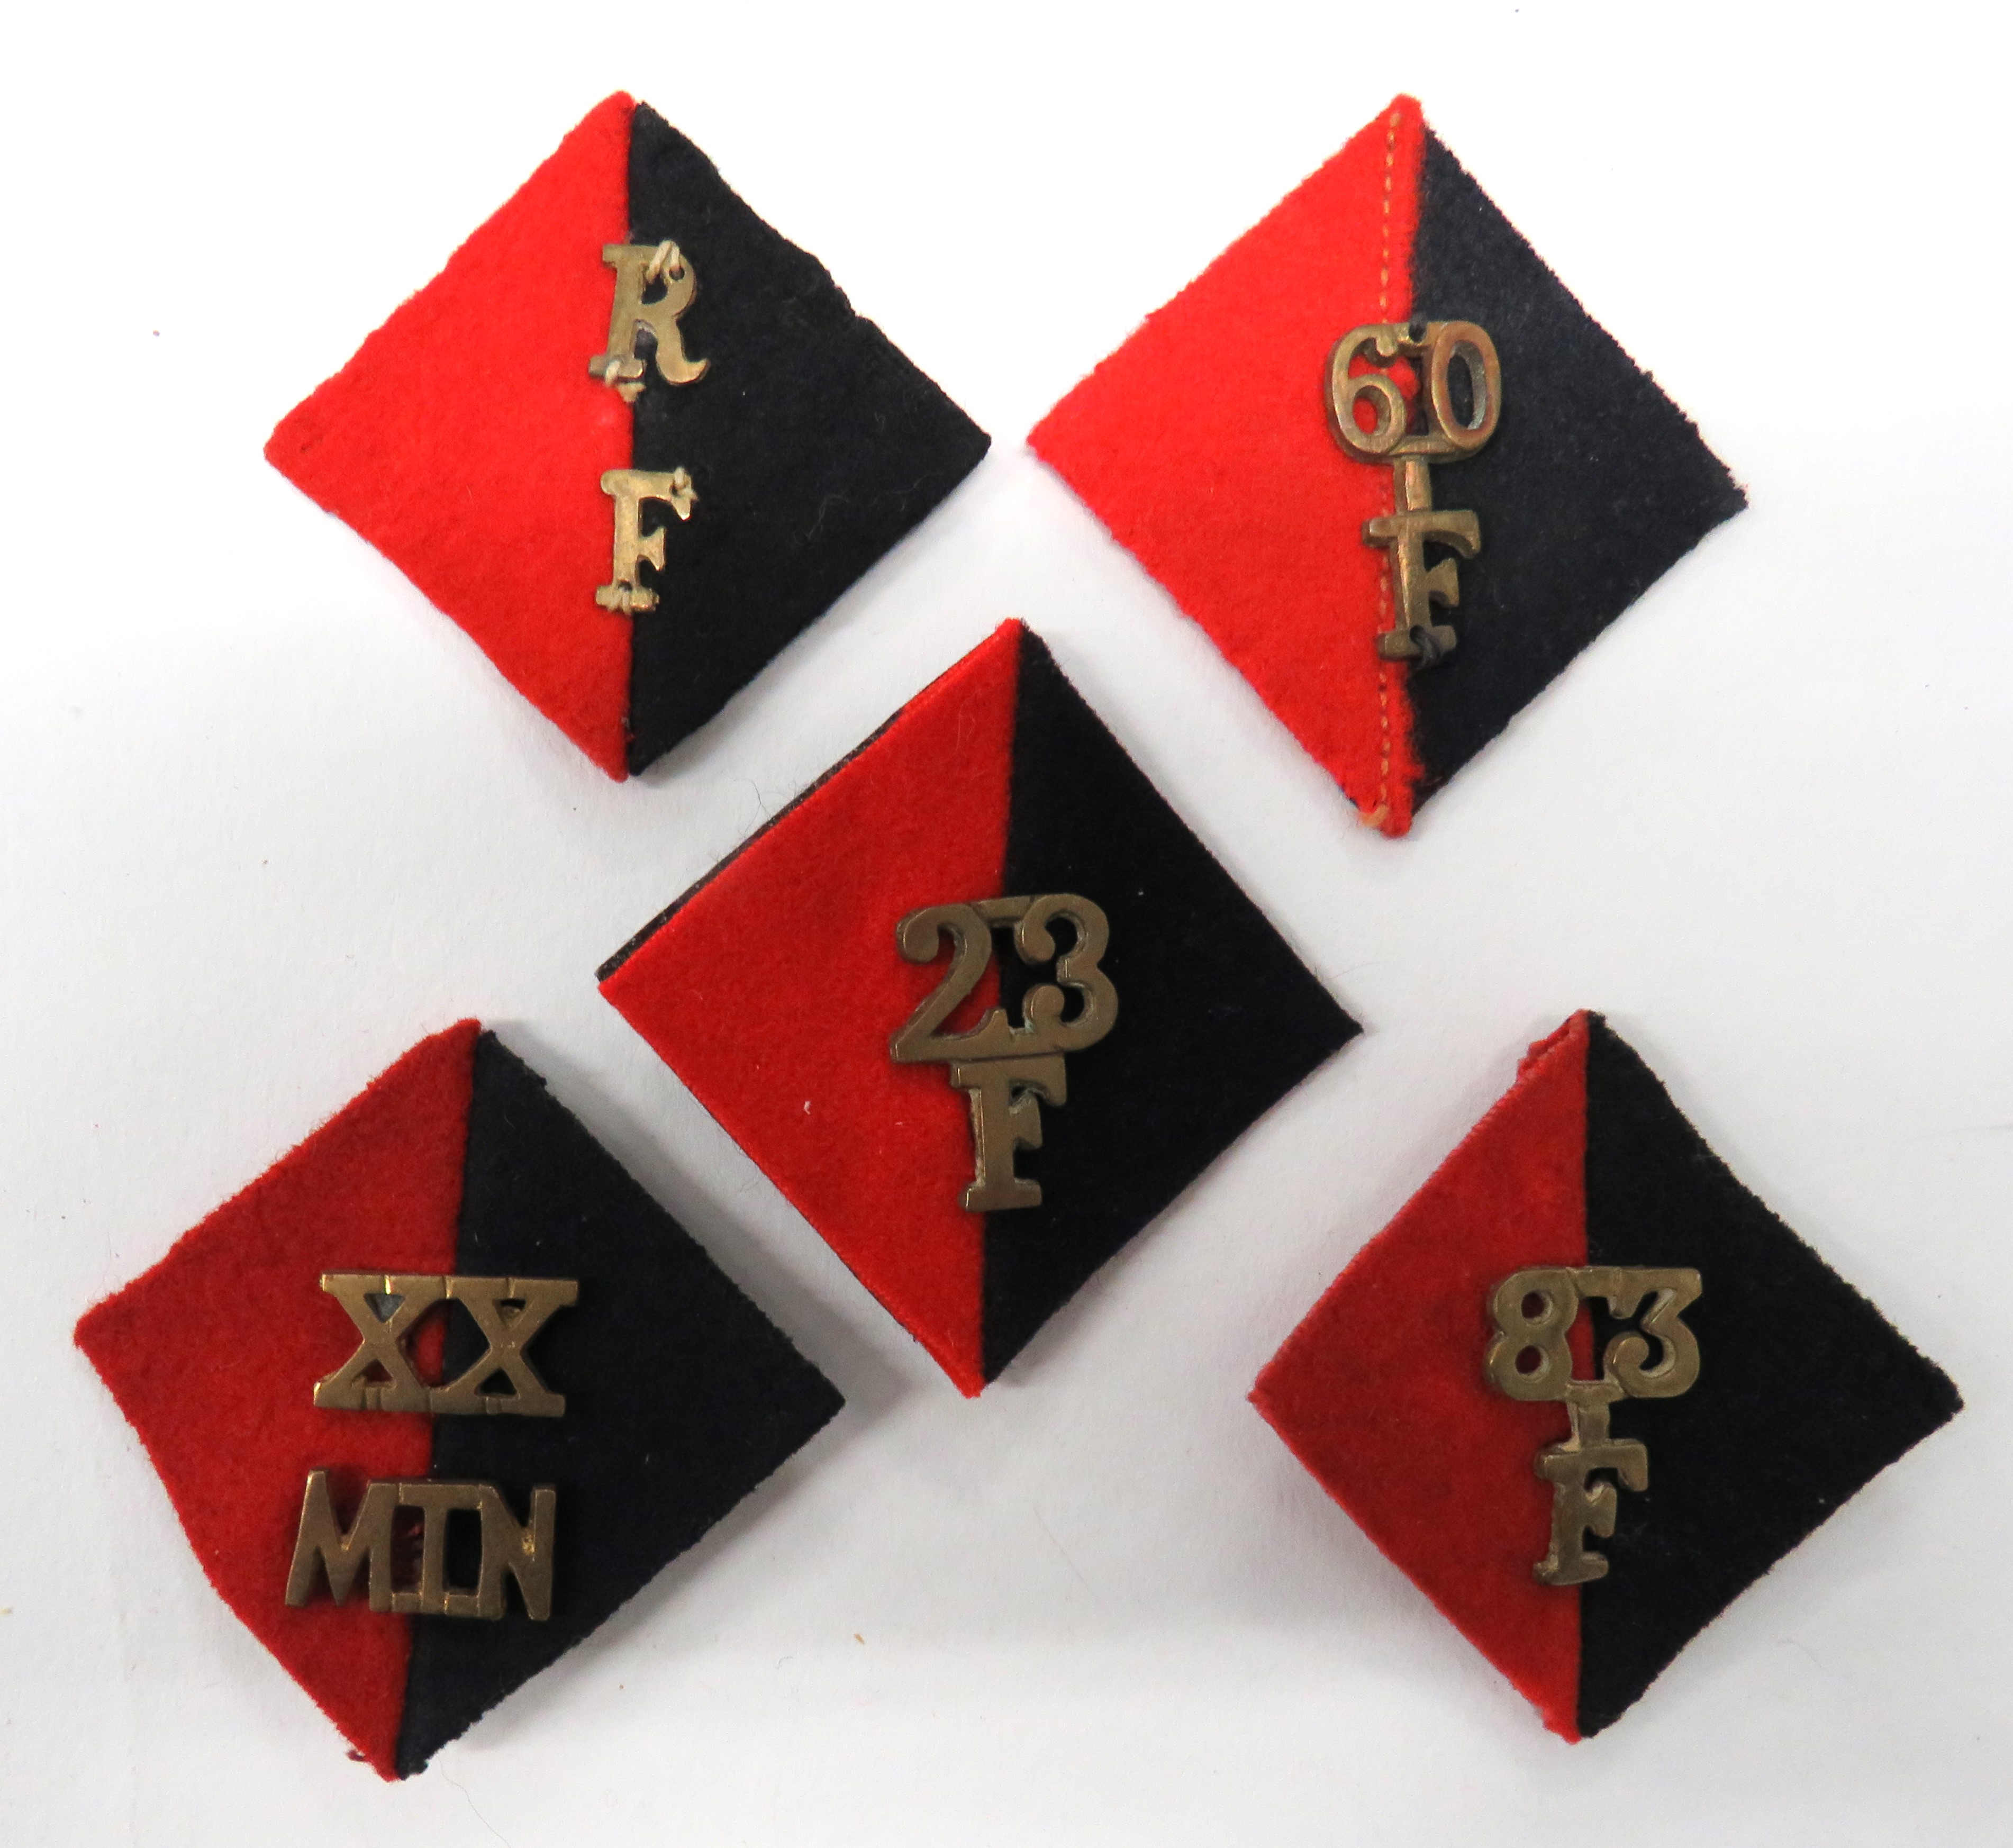 Five Royal Artillery Pagri Badges consisting red and dark blue, felt backing diamonds with